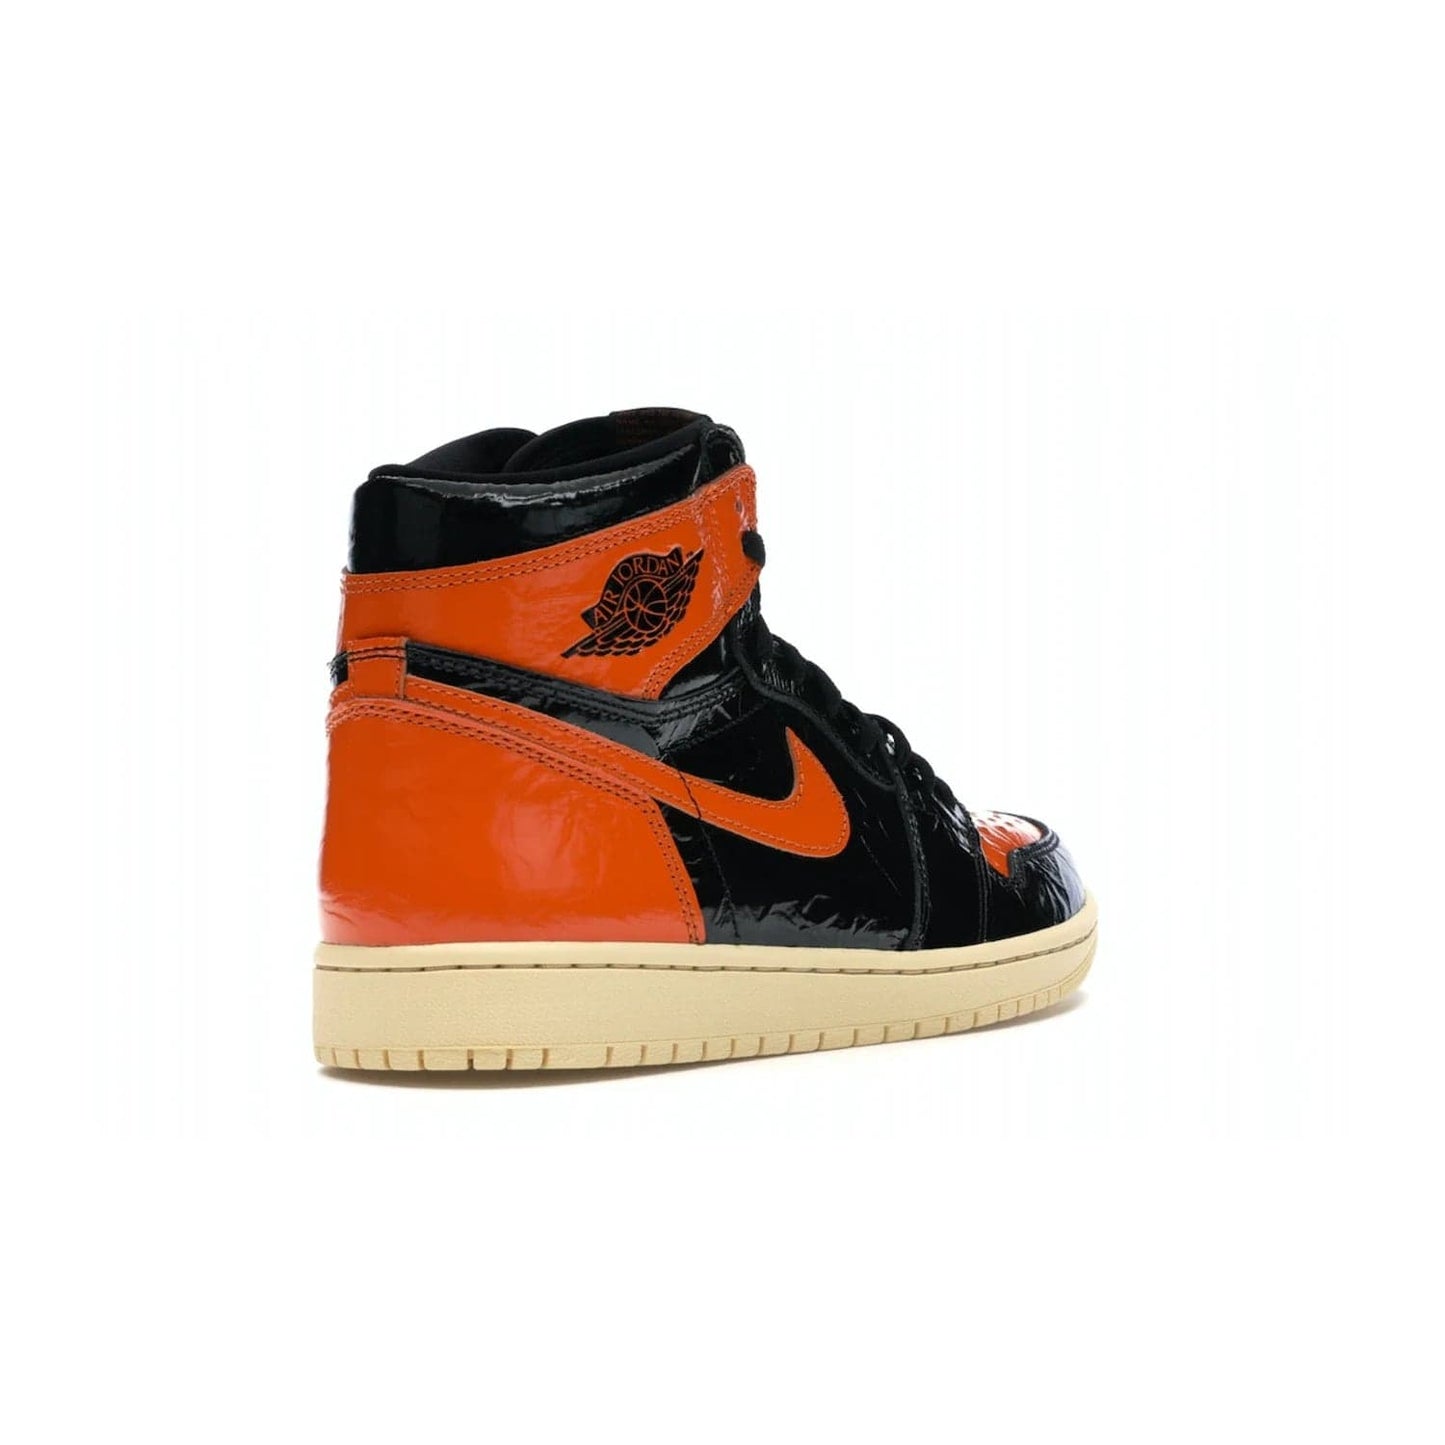 Jordan 1 Retro High Shattered Backboard 3.0 - Image 32 - Only at www.BallersClubKickz.com - #
Jordan 1 Retro High Shattered Backboard 3.0: the perfect blend of modern style and nostalgic flair featuring an orange and black crinkled patent leather upper and yellowed vanilla outsole. Get these exclusive sneakers released in October of 2019!